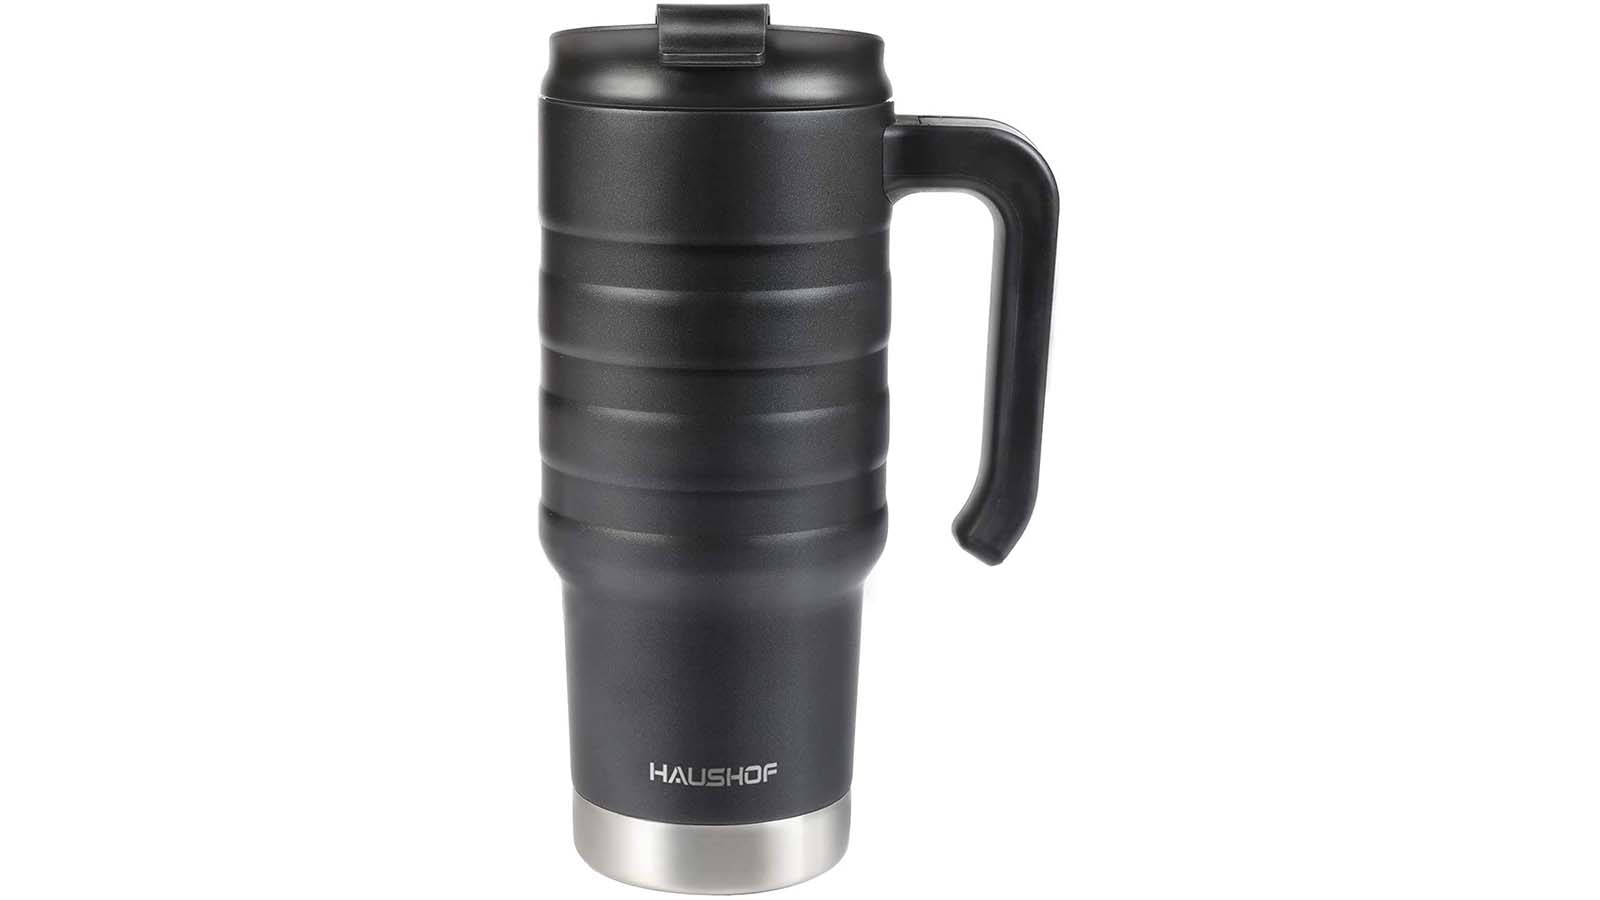 Readygogo Stainless Steel Vacuum Insulated Coffee Mug with Lid, Perfect Travel Cup for Hot and Cold Drinks, Thermal Coffee and Tea Mugs